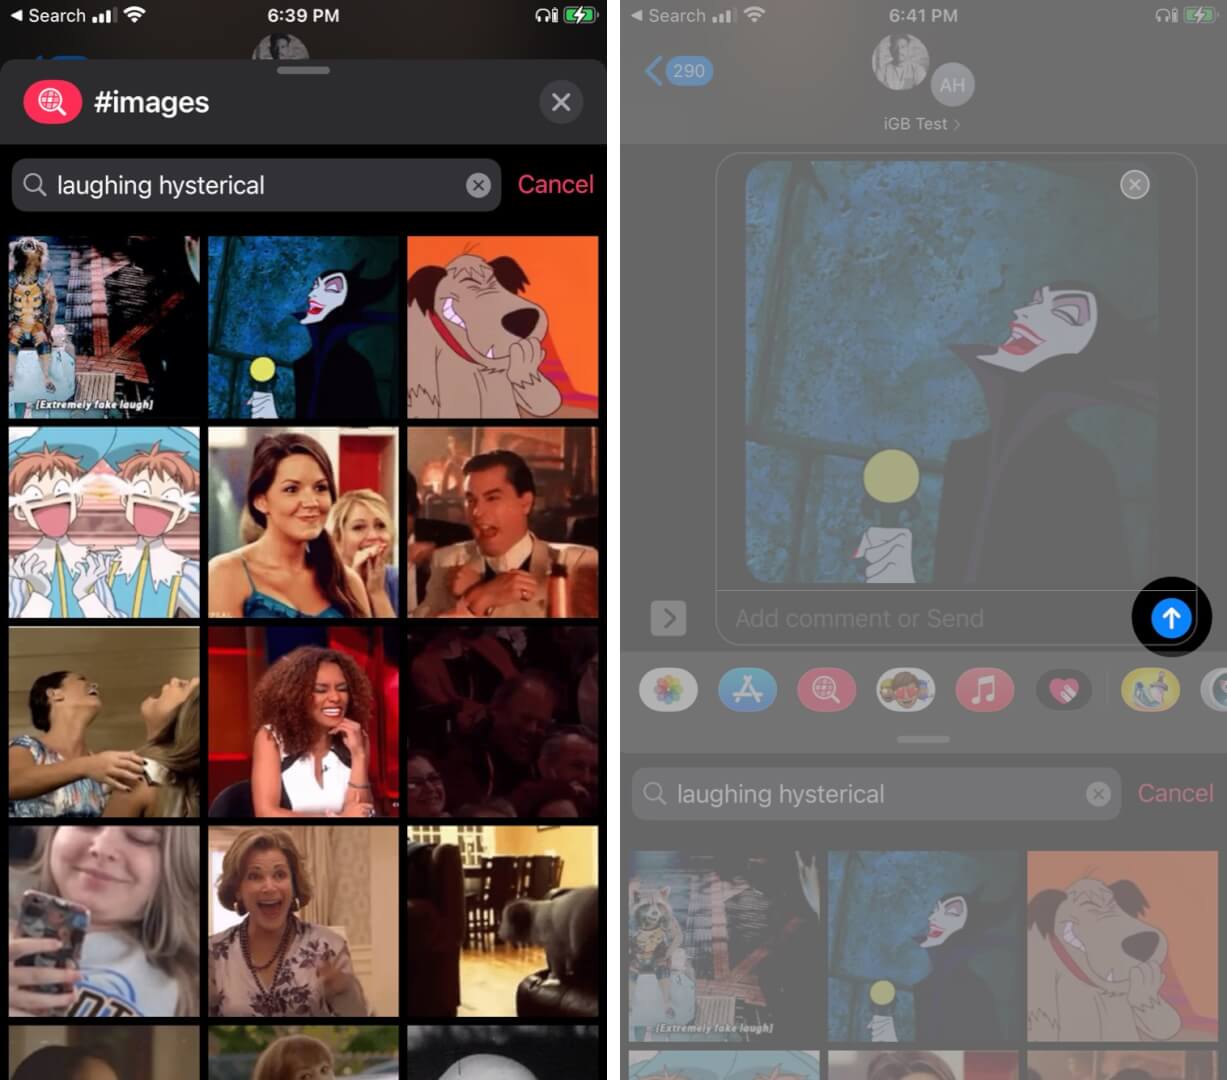 Select GIF you would like to send in iMessage, tap on forward